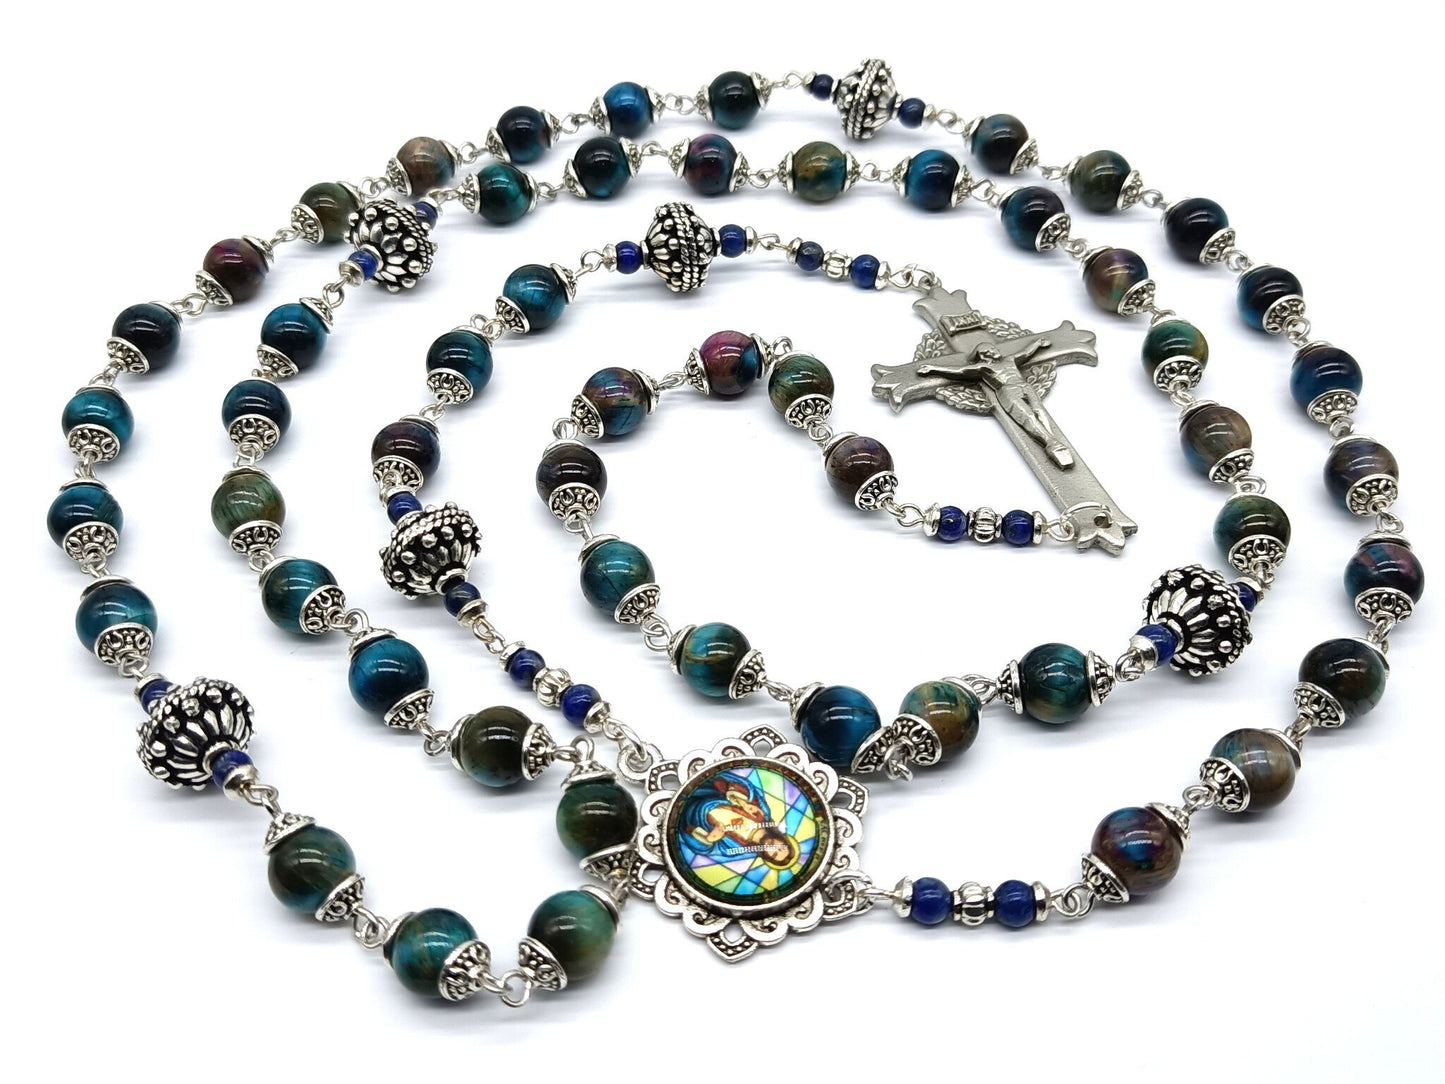 Sacred Heart unique rosary beads circle rosary with tigers eye gemstone beads, linking crucifix, silver pater beads, caps and picture centre medal.